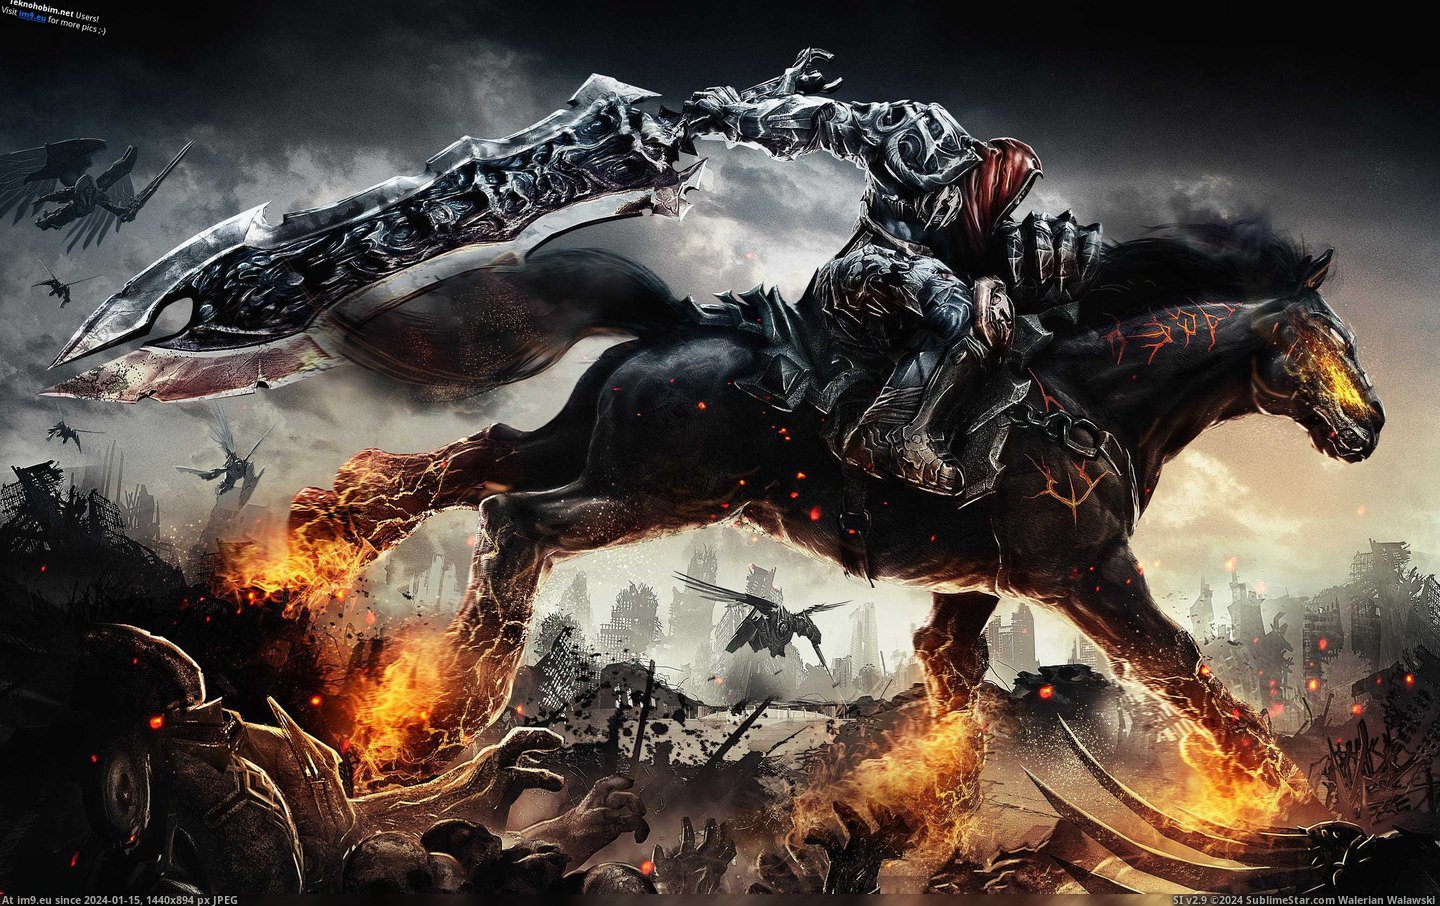 #Wallpaper #Wide #Darksiders #Game Darksiders Game Wide HD Wallpaper Pic. (Image of album Unique HD Wallpapers))